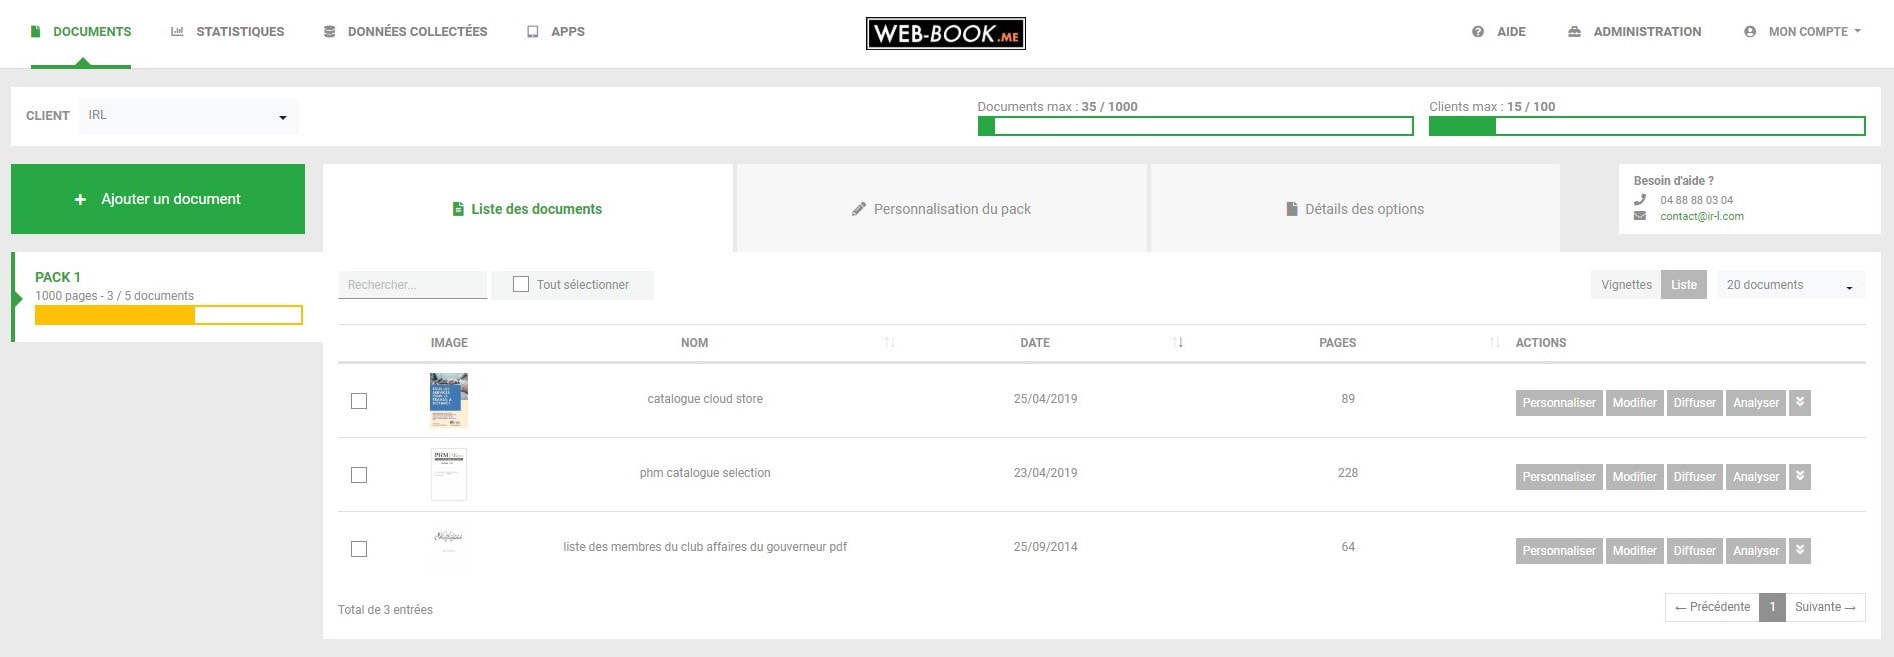 Interface administration WEB-BOOK